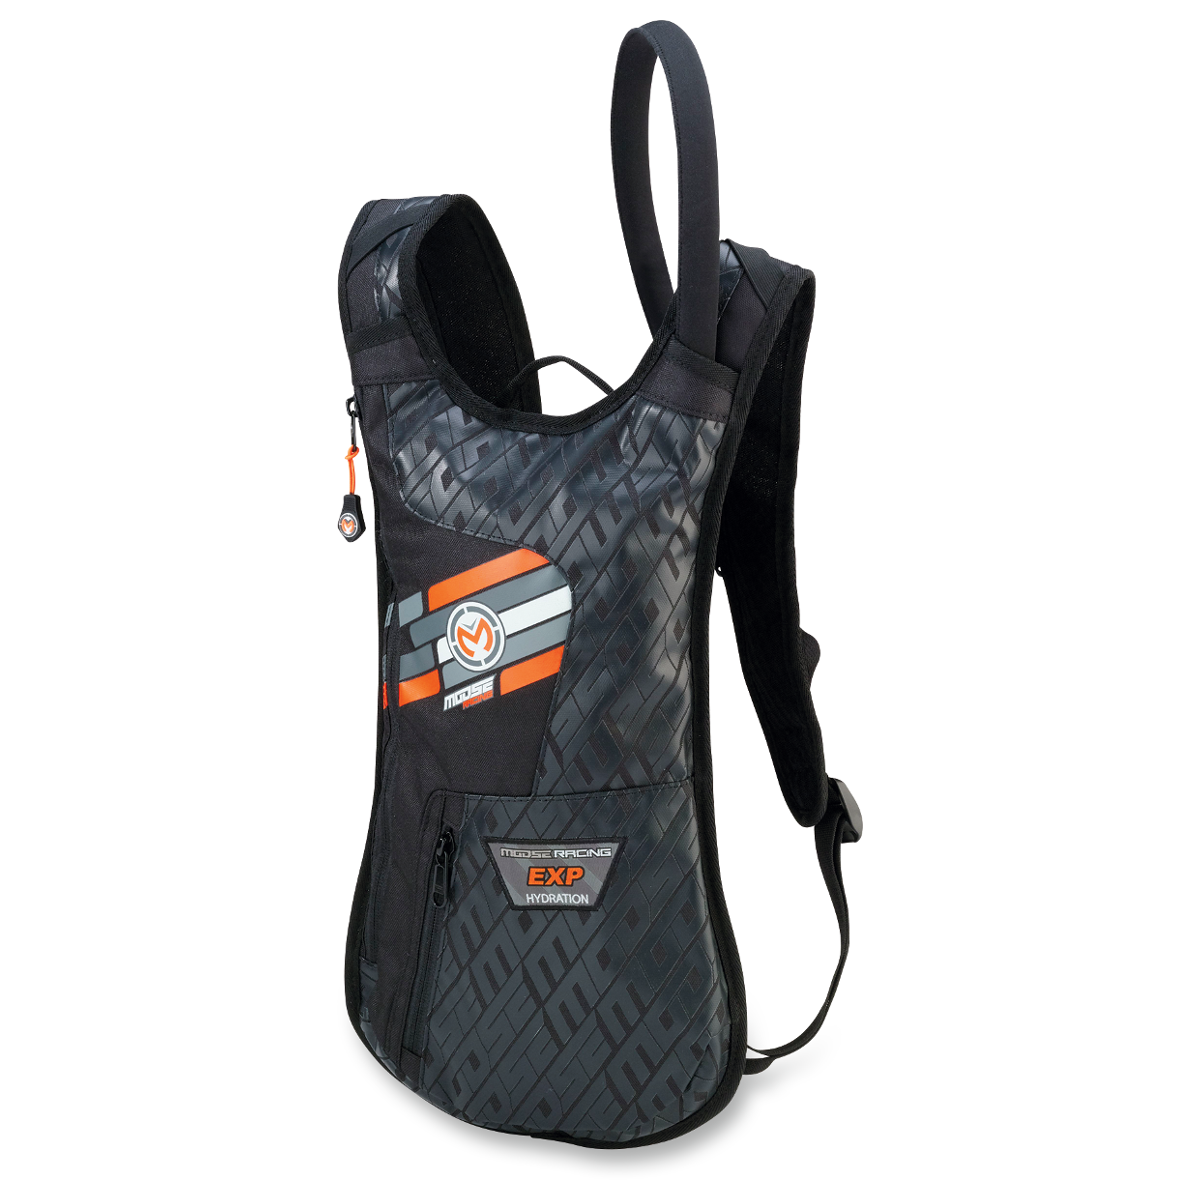 Moose Racing Hydration Pack Expedition Black